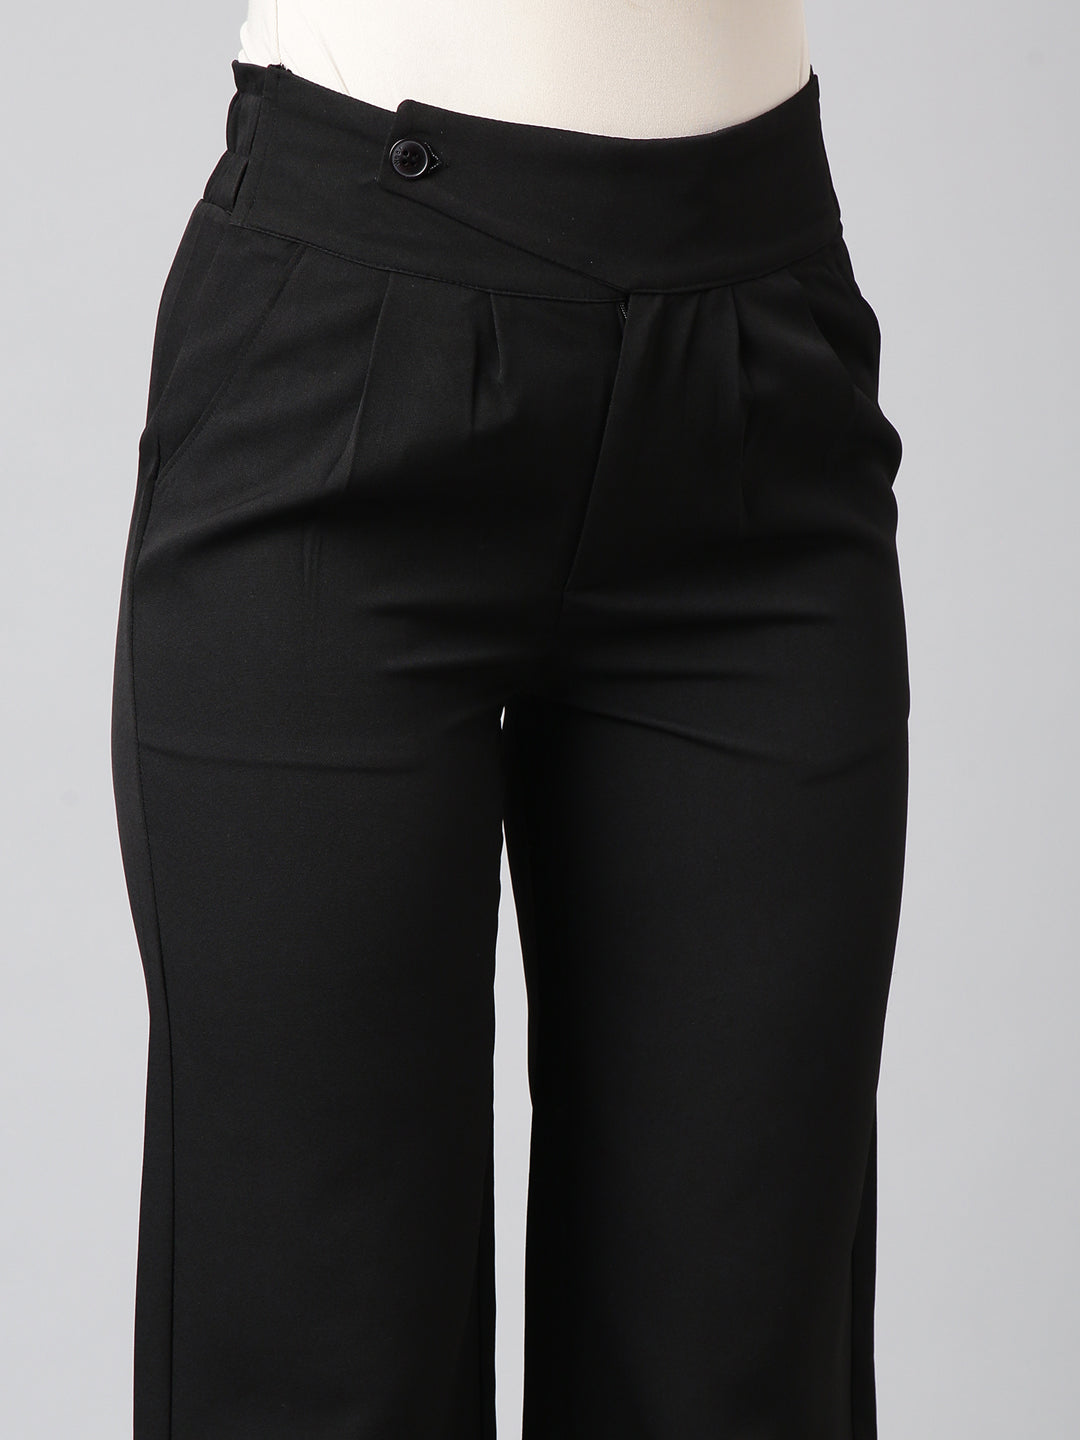 Women Solid Black Parallel Trousers